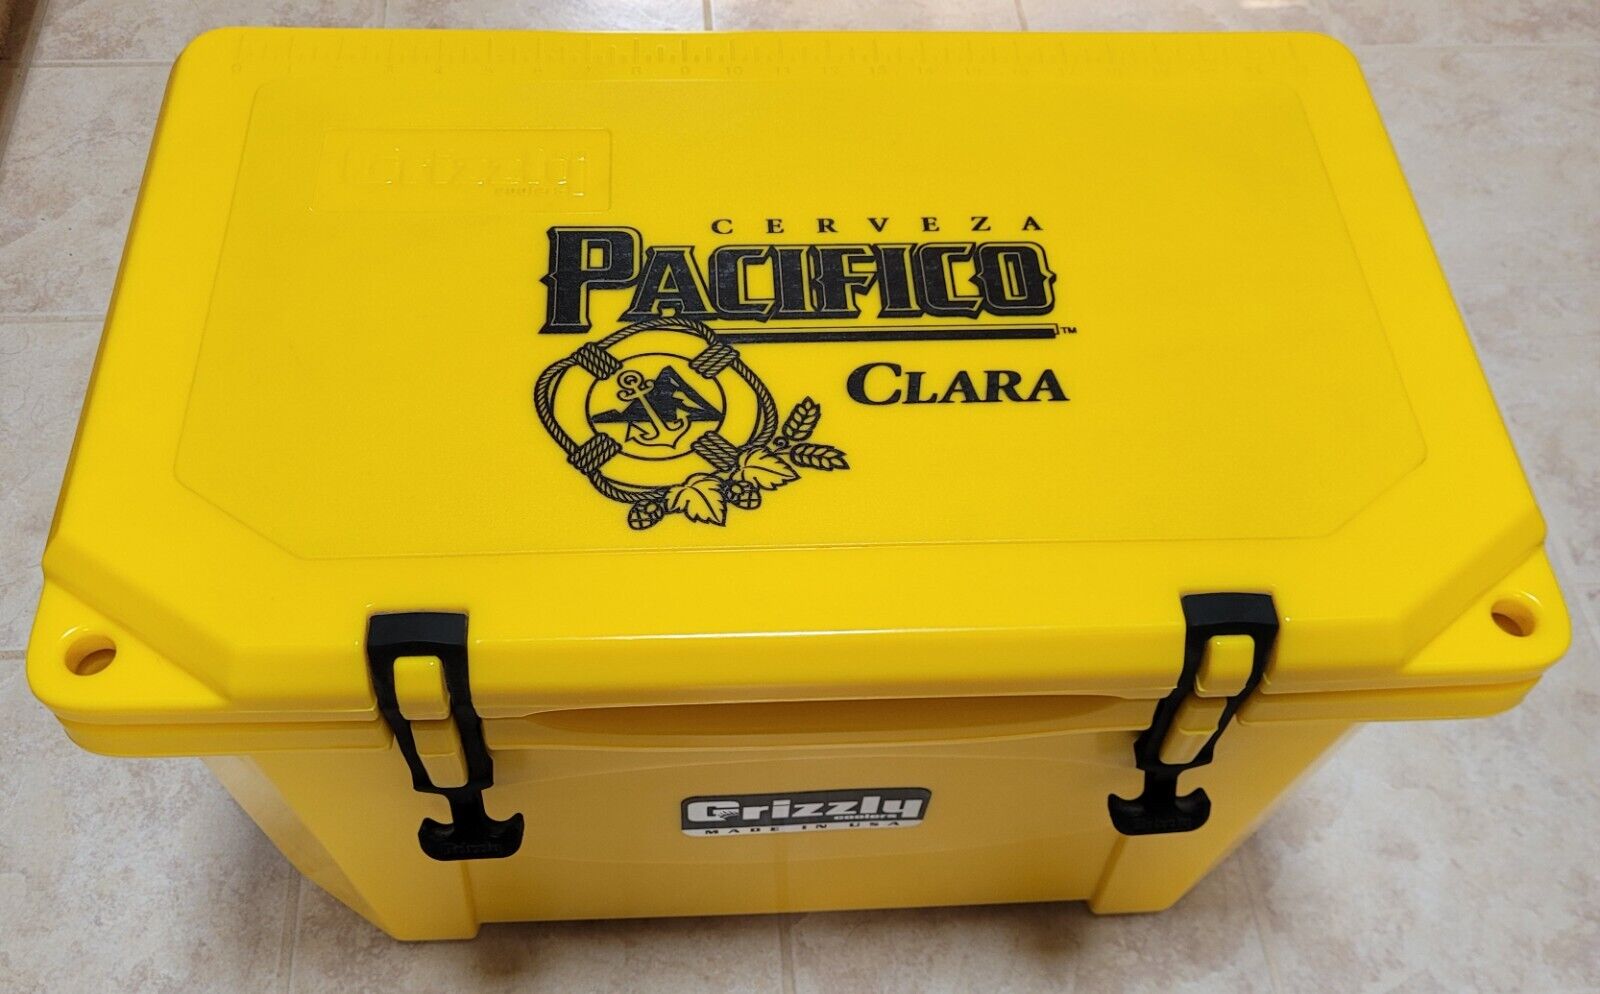 GRIZZLY PACIFICO CLARA 40 QT CERVEZA BEER COOLER YELLOW BRAND USA